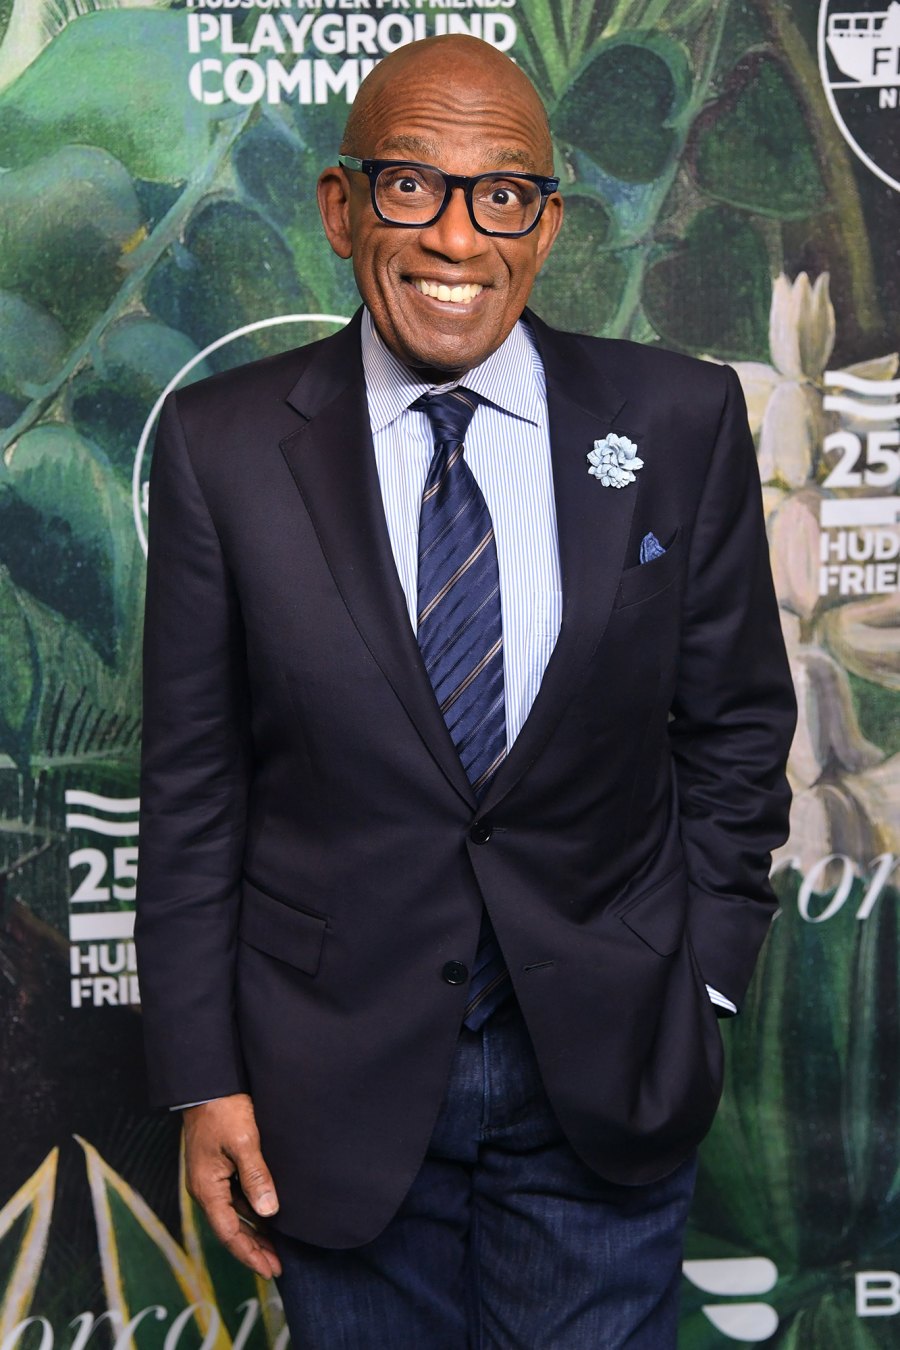 Al Roker's Quotes About His Health Through the Years blue tie